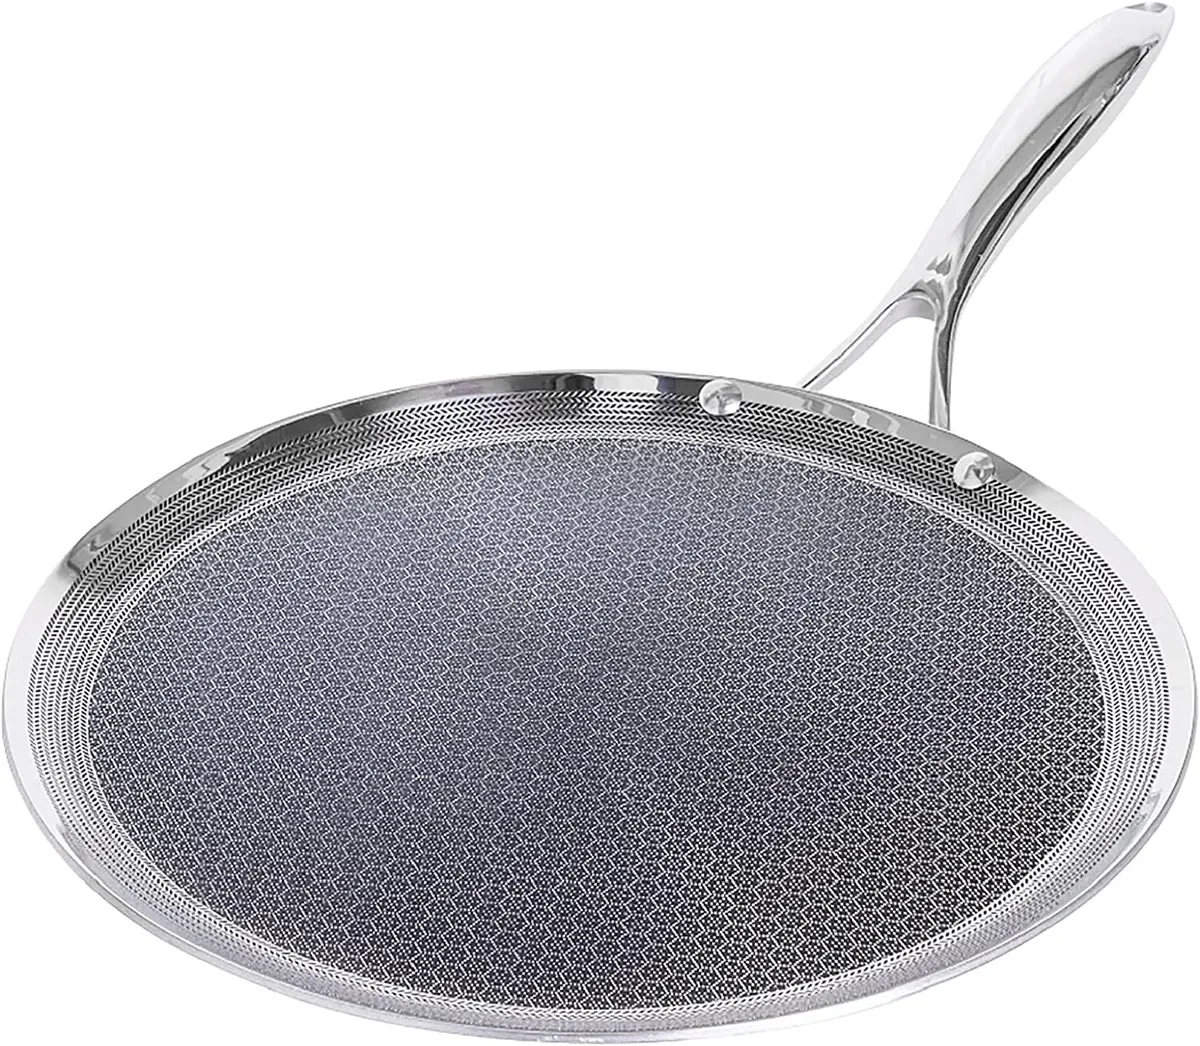  HexClad 12 Inch Hybrid Stainless Steel Frying Pan with  Stay-Cool Handle (Frying Pan): Home & Kitchen